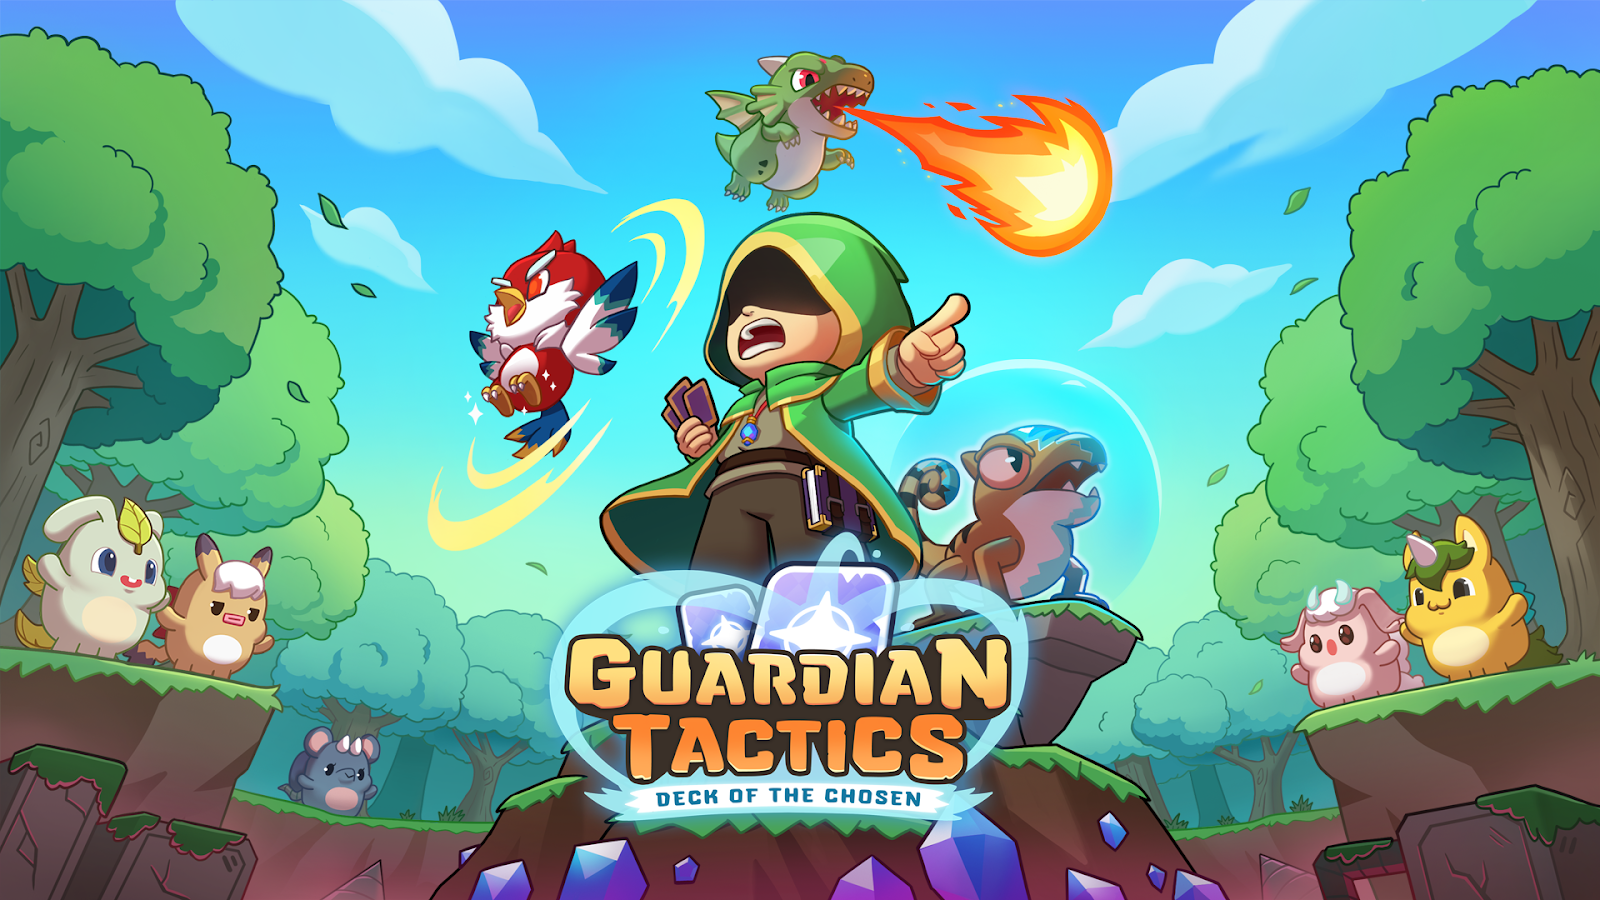 Deck-building roguelike features adorable Guardians, seriously deep gameplay, demo now available